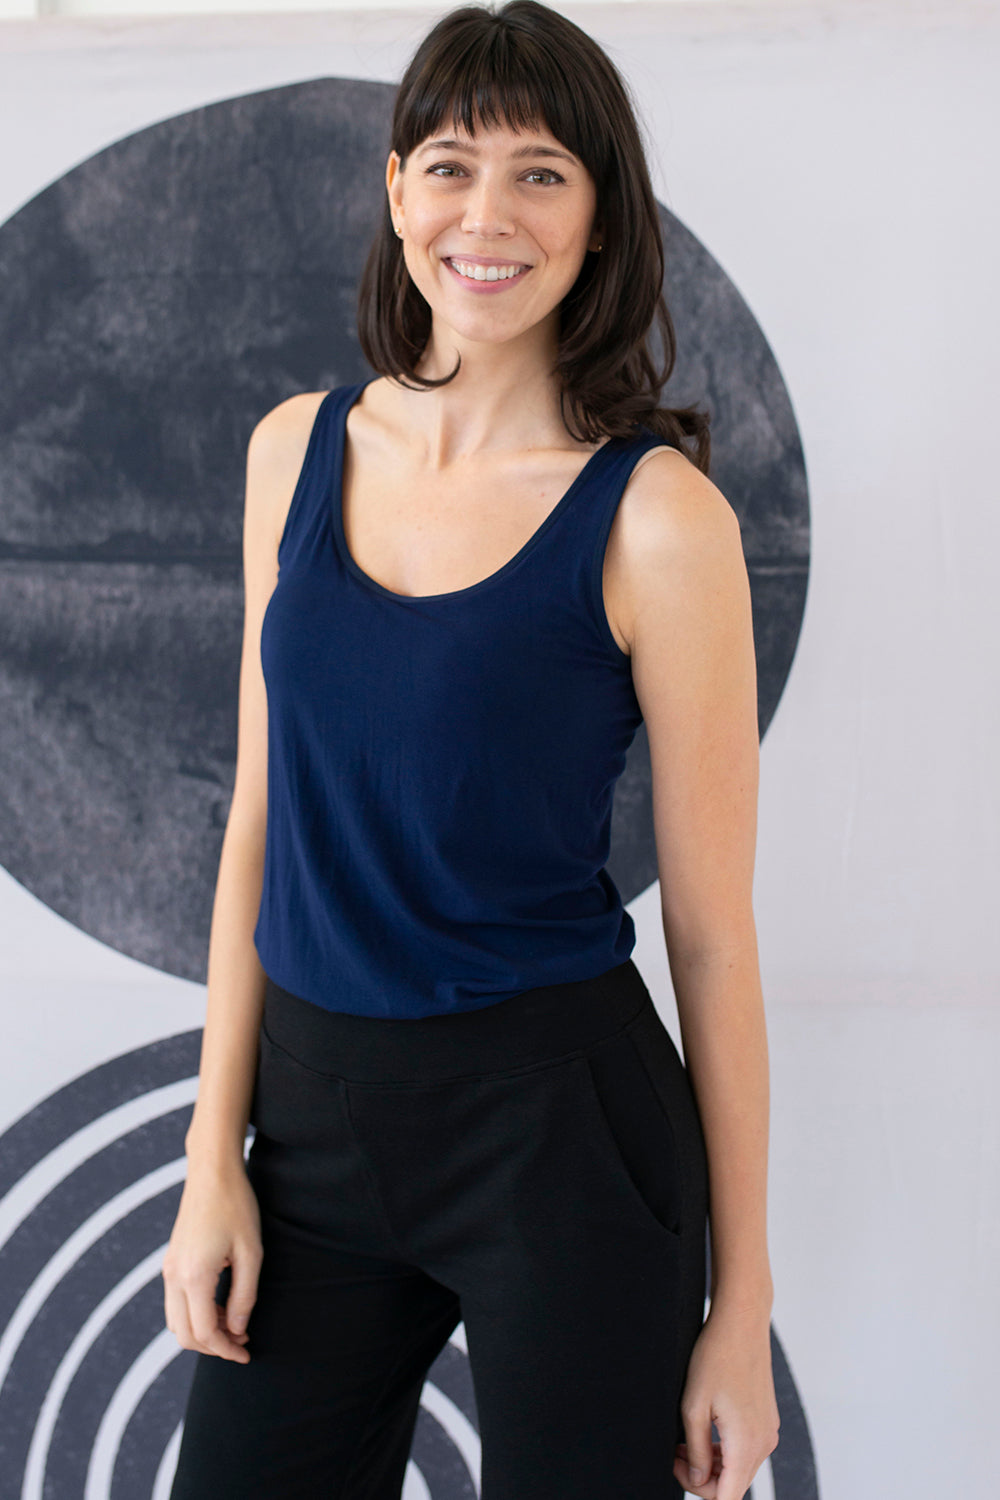 Shandra Relaxed Fit Tank Top, Ethically Made in Canada